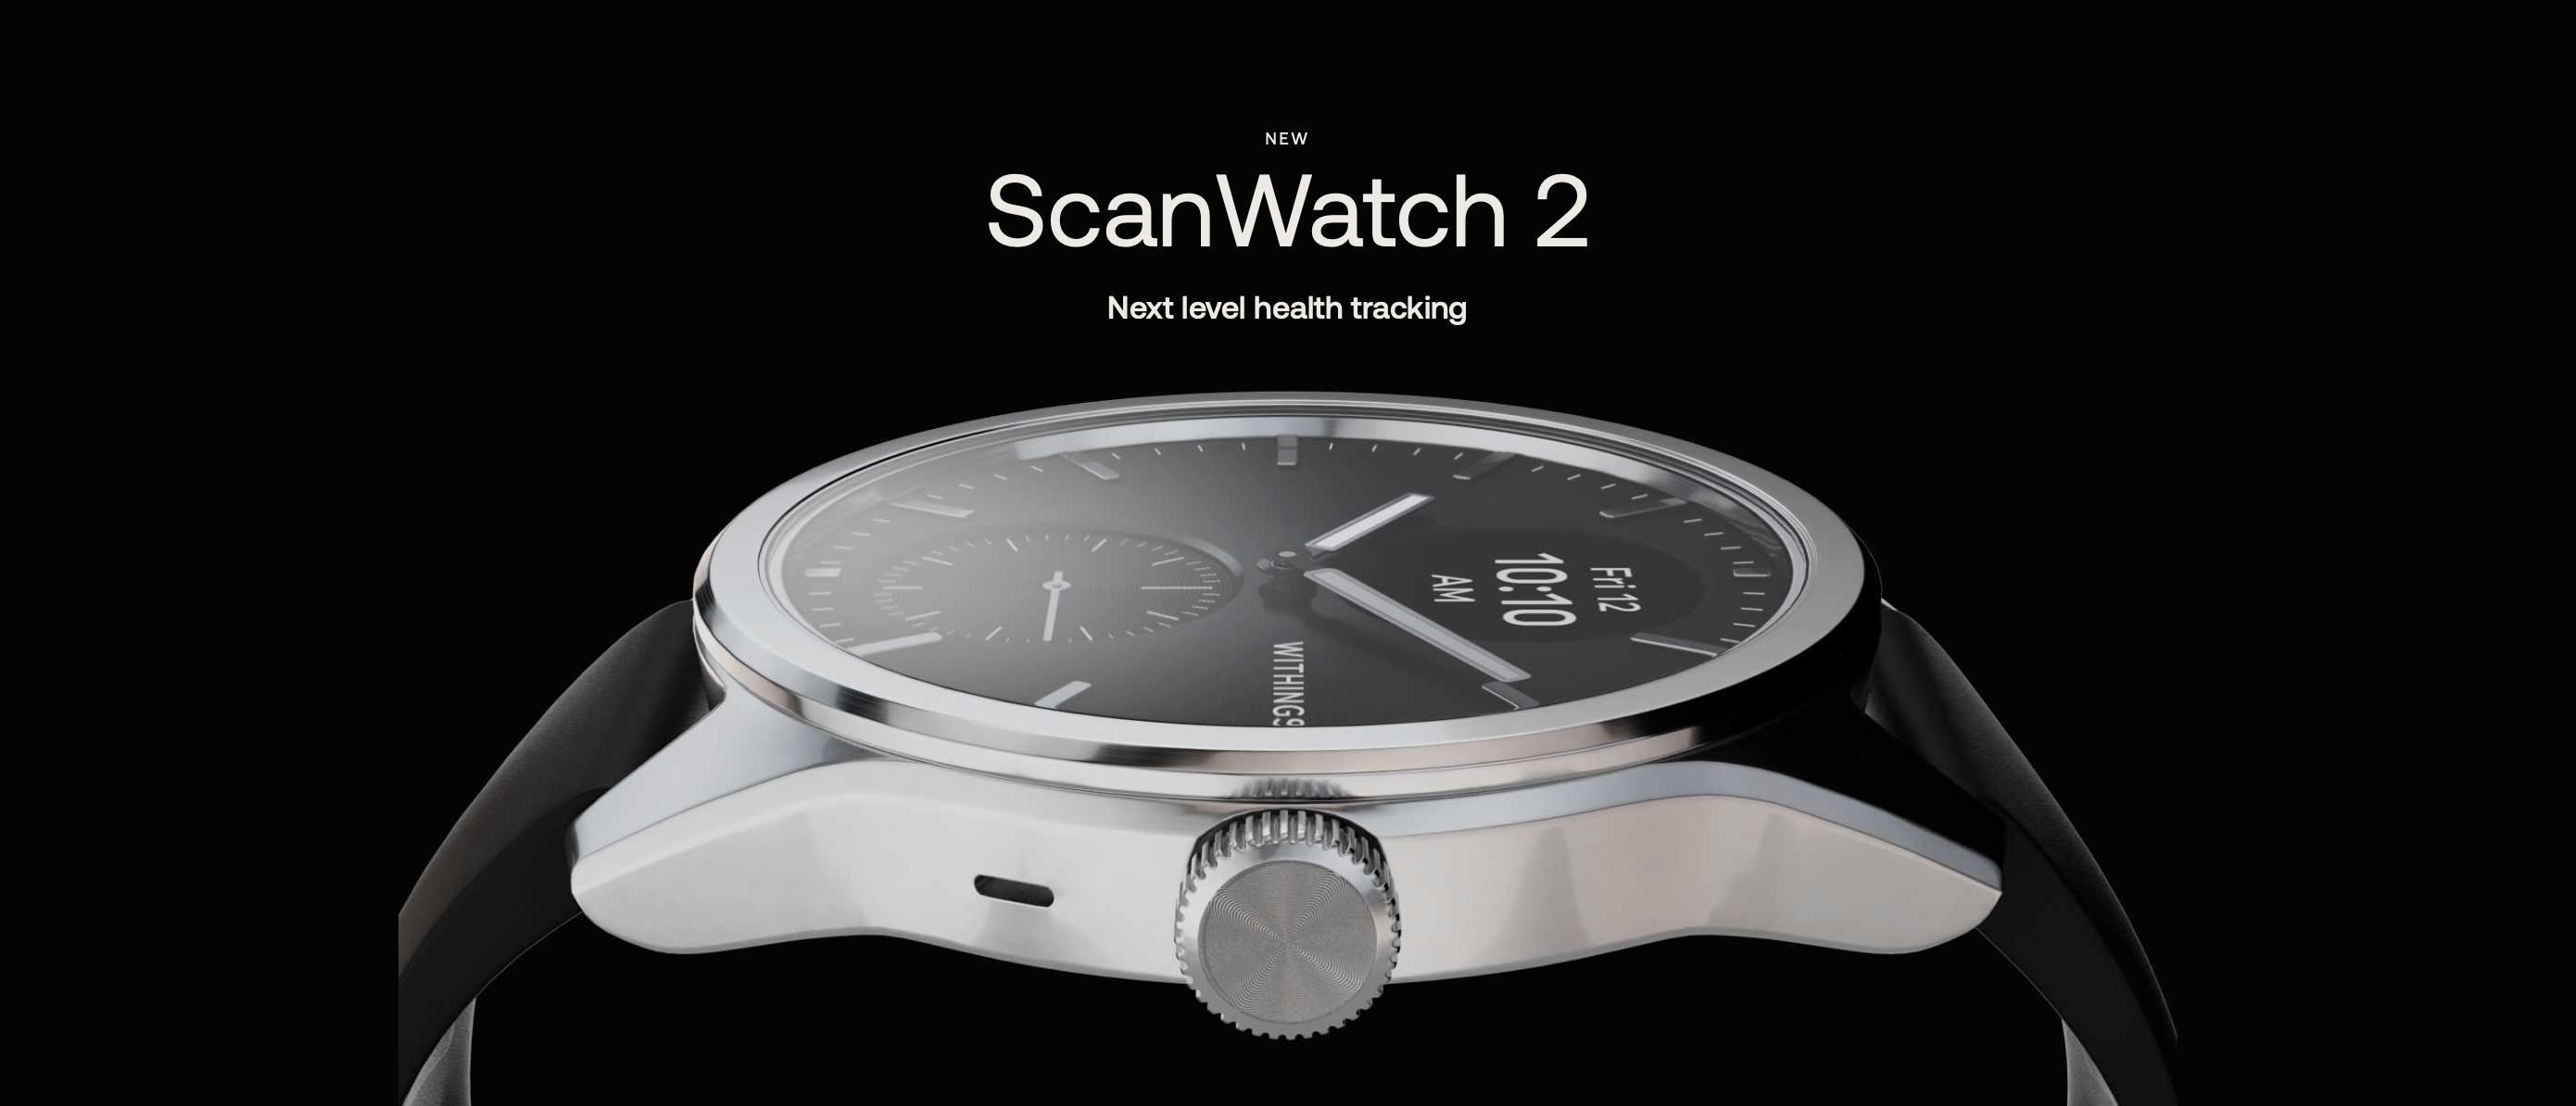 Withings ScanWatch 2: hybrid smartwatch with OLED screen, SpO2 sensor and  up to 30 days of battery life